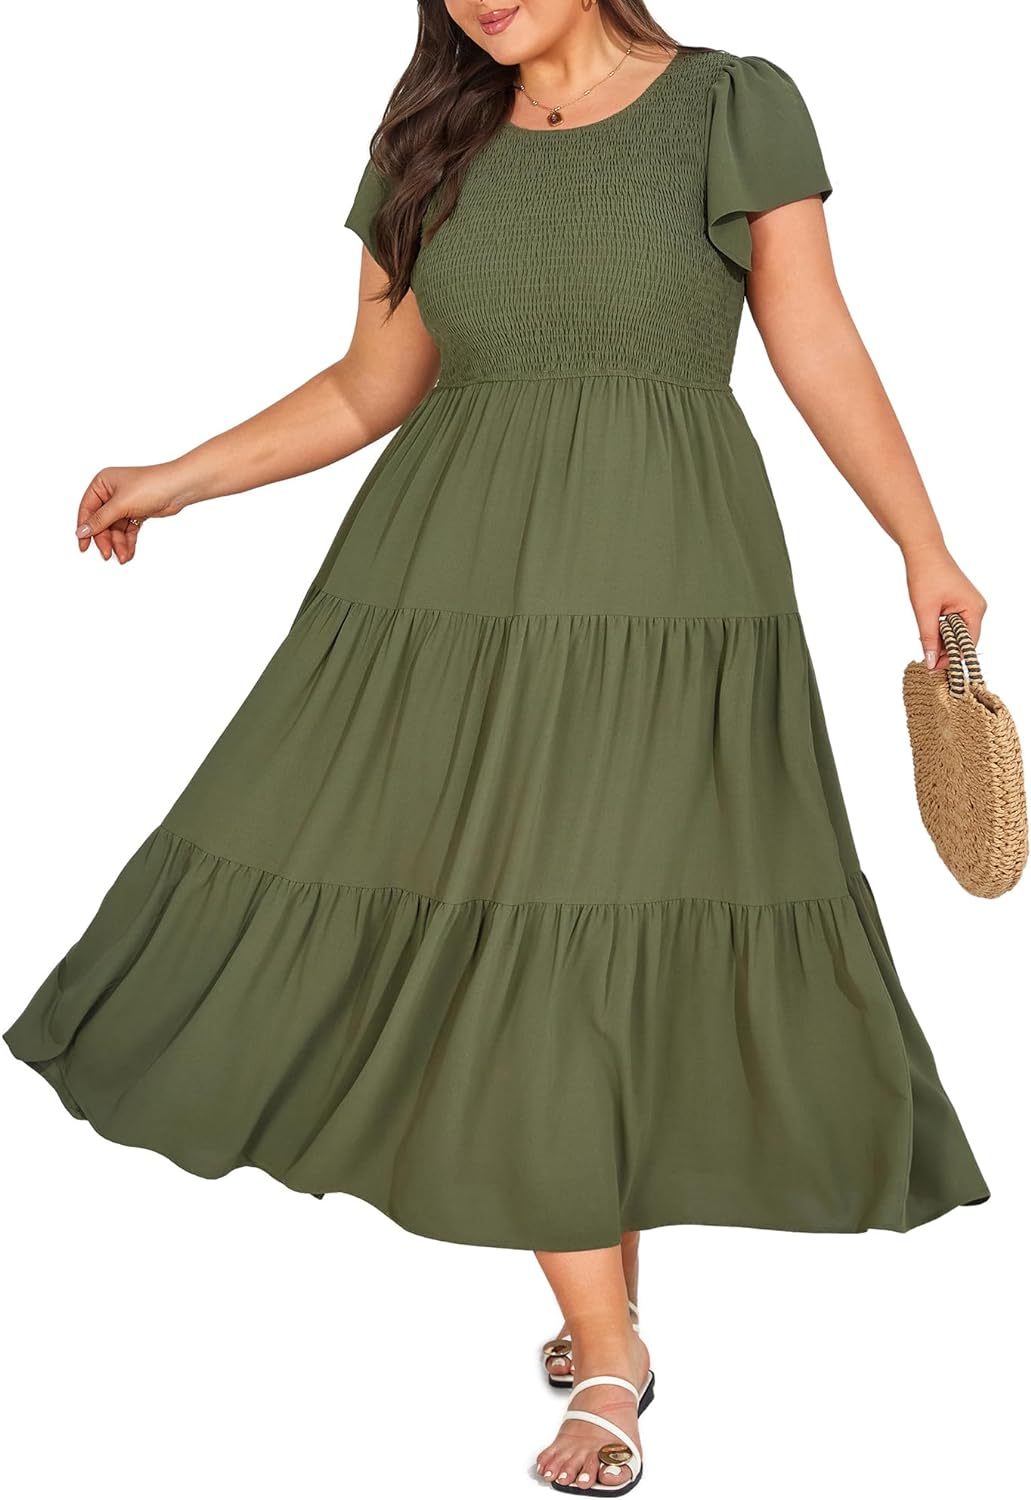 KIMCURVY Women’s Plus Size Summer Casual Crew Neck Flutter Short Sleeve Smocked Tiered Maxi Dress